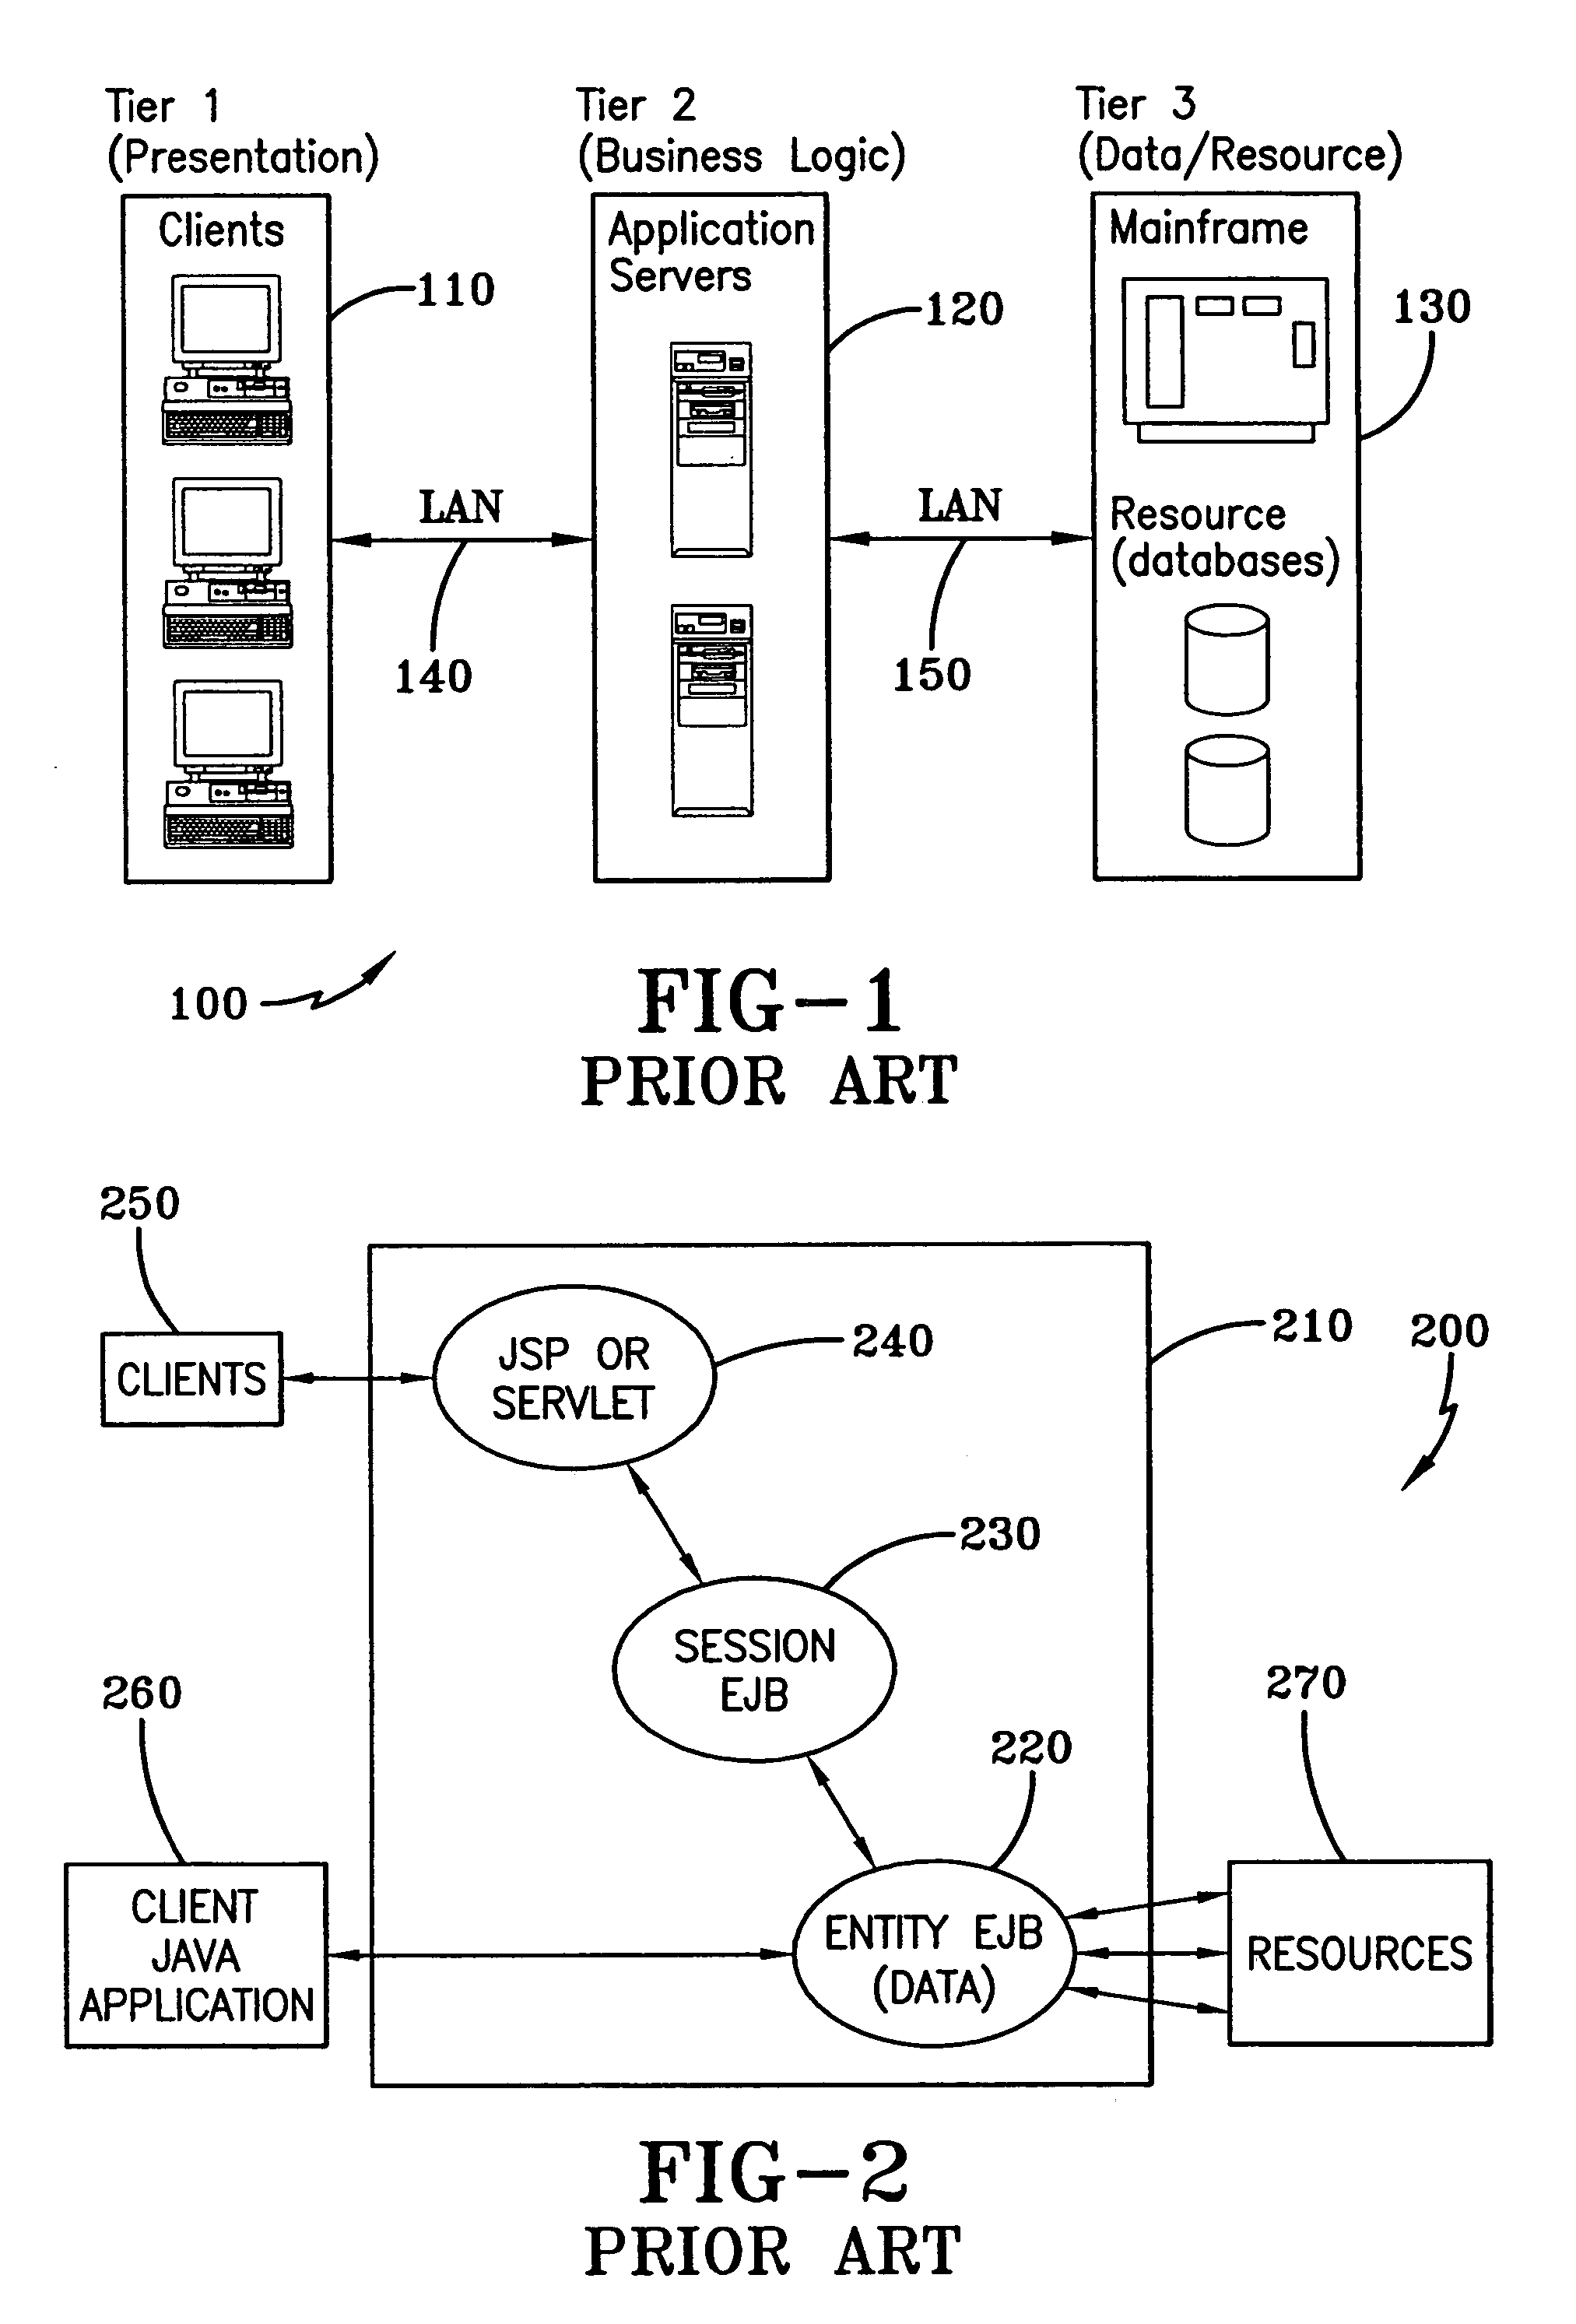 System and method for dynamically caching dynamic multi-sourced persisted EJBs